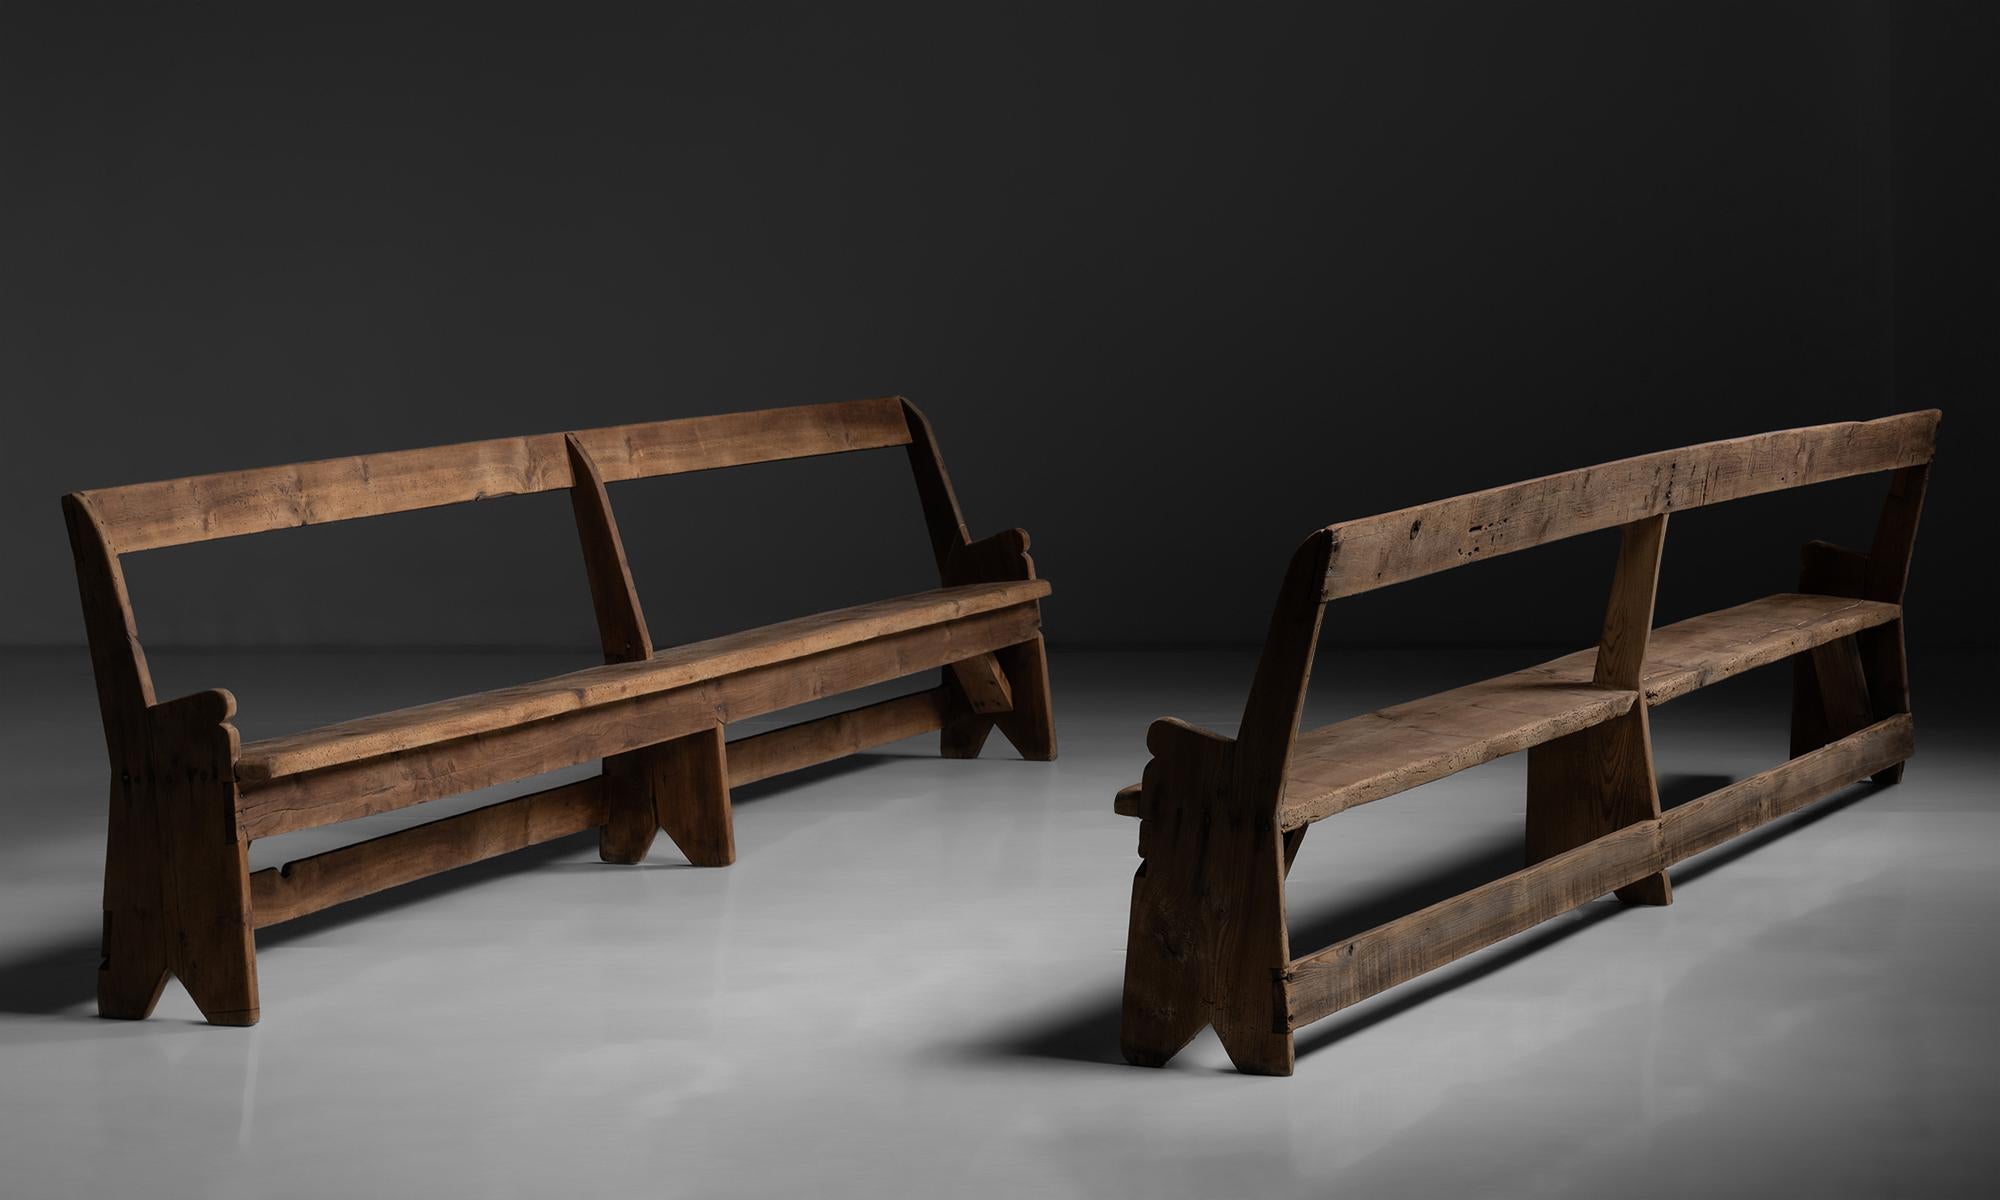 12 Foot Long Primitive Benches

America circa 1930

Solid pine construction, with single plank seat and back.

Measures 149.25”L x 14”d x 33.25”h x 17”seat

*Please note the price is per unit*